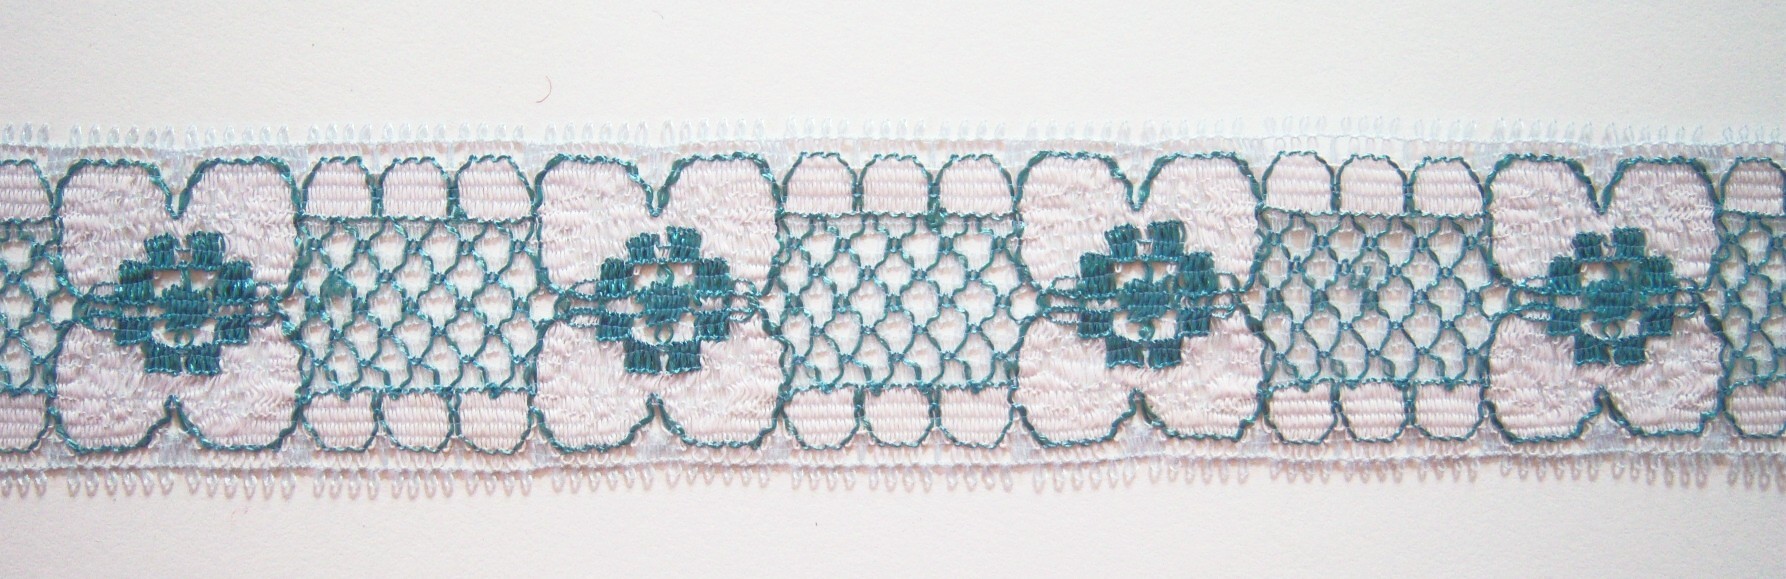 Pearl/Teal 1 1/4" Lace